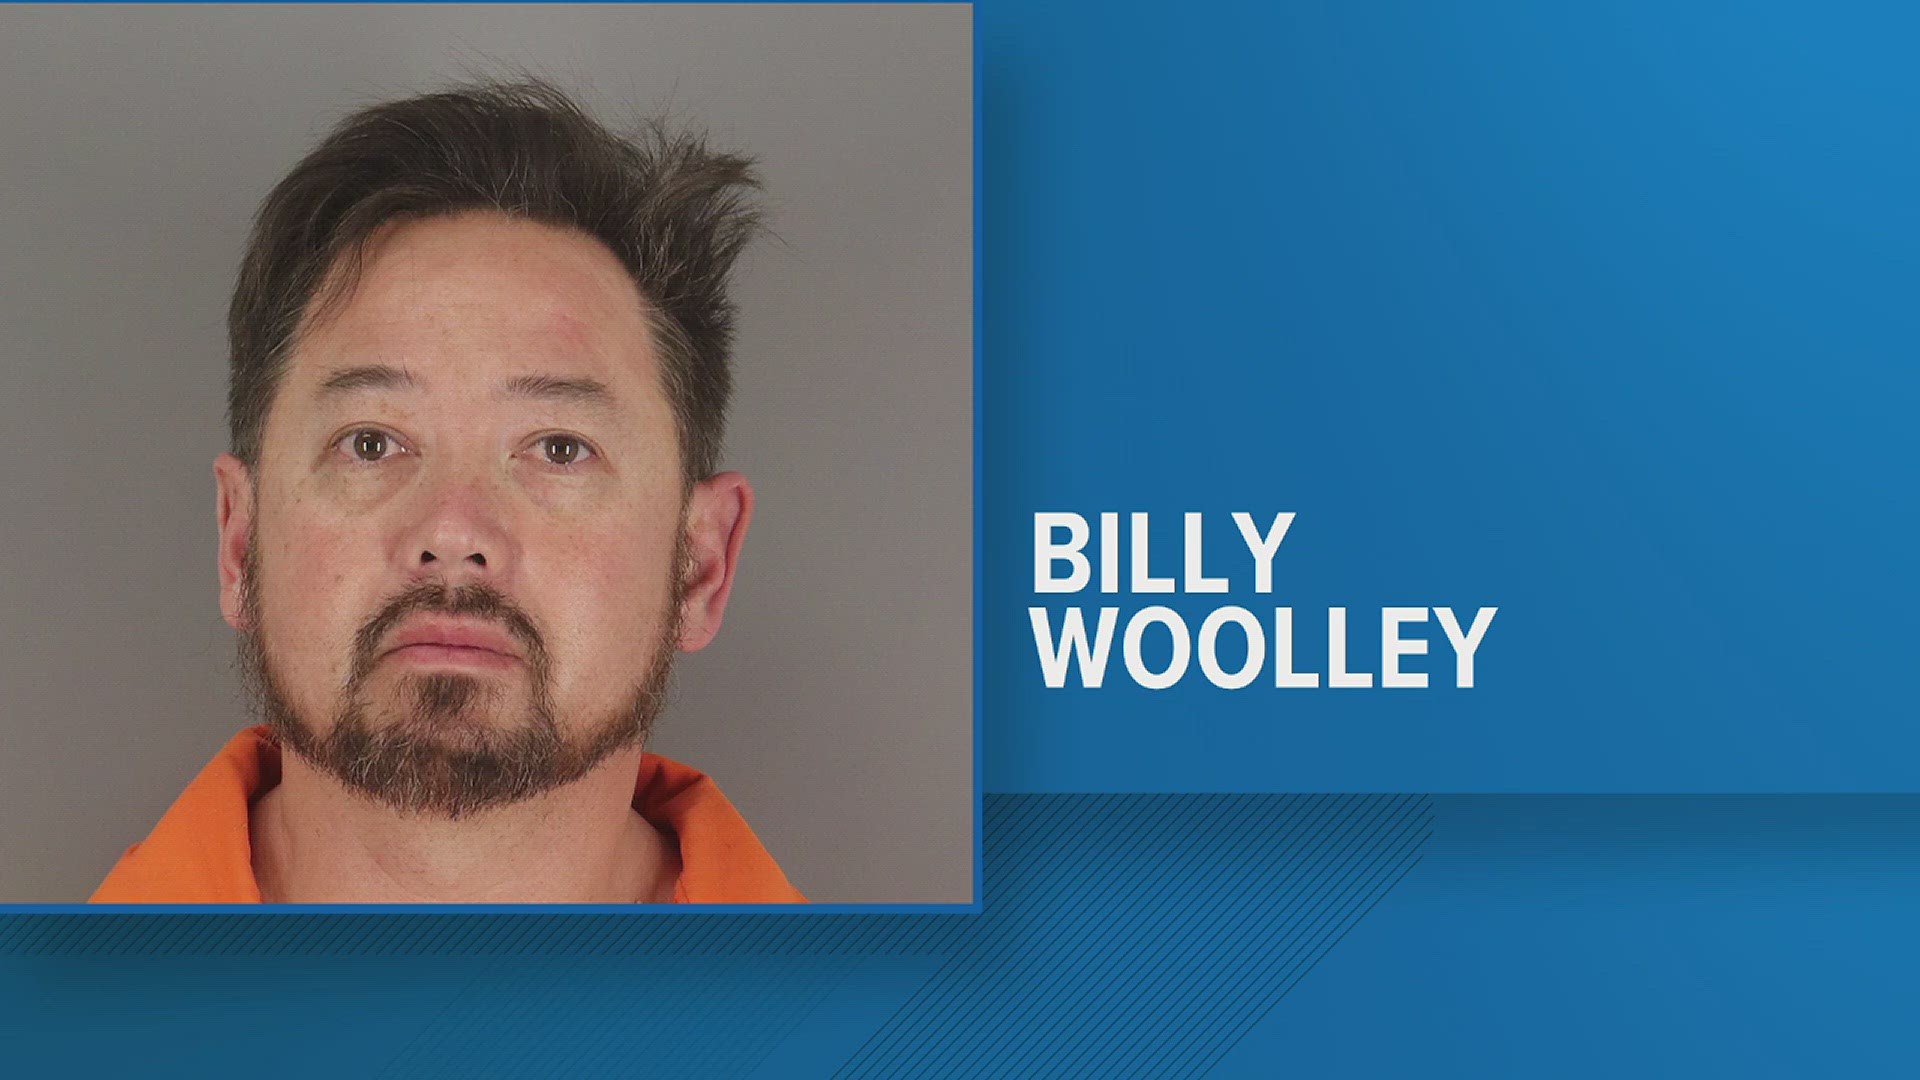 Billy Lynn Wooley is being held in the Jefferson County Correctional Facility on several charges including Indecency with a child, sexual assault, and more.